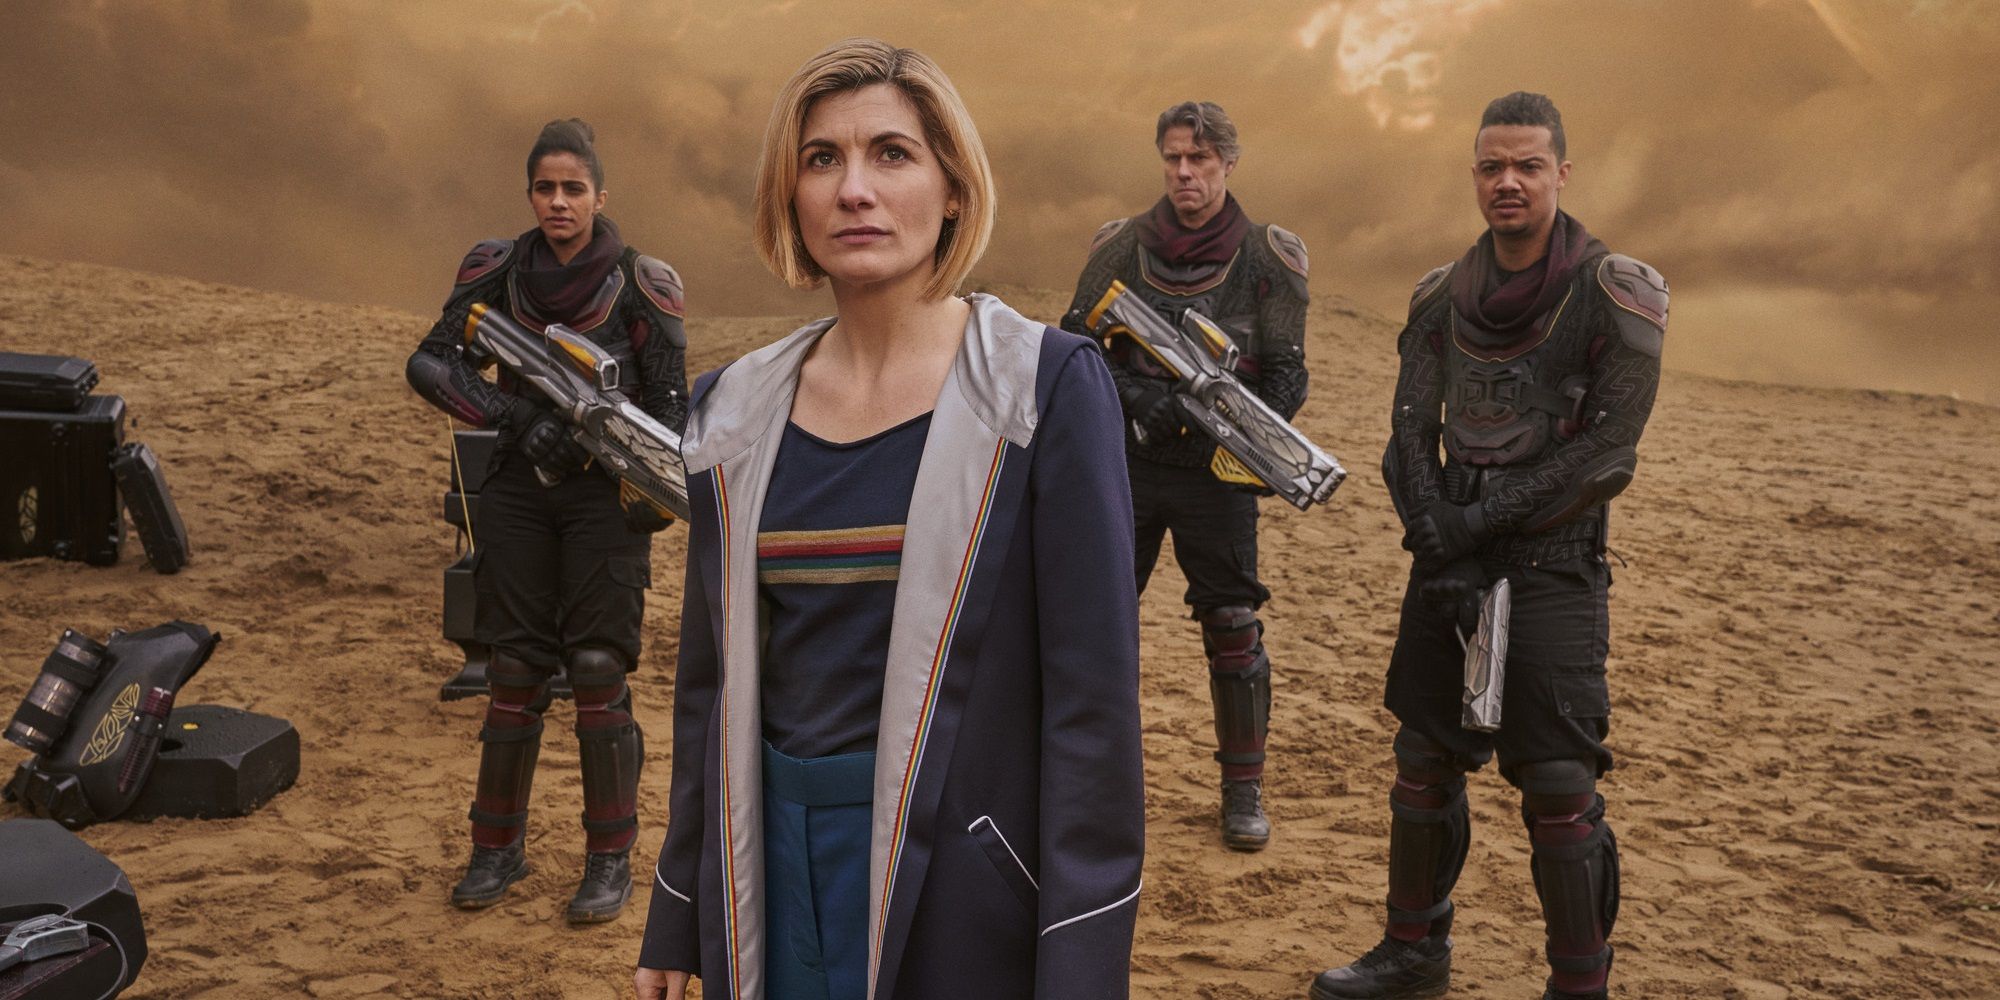 The Thirteenth Doctor as the Fugitive Doctor leading Division in the Temple of Atropos on Doctor Who